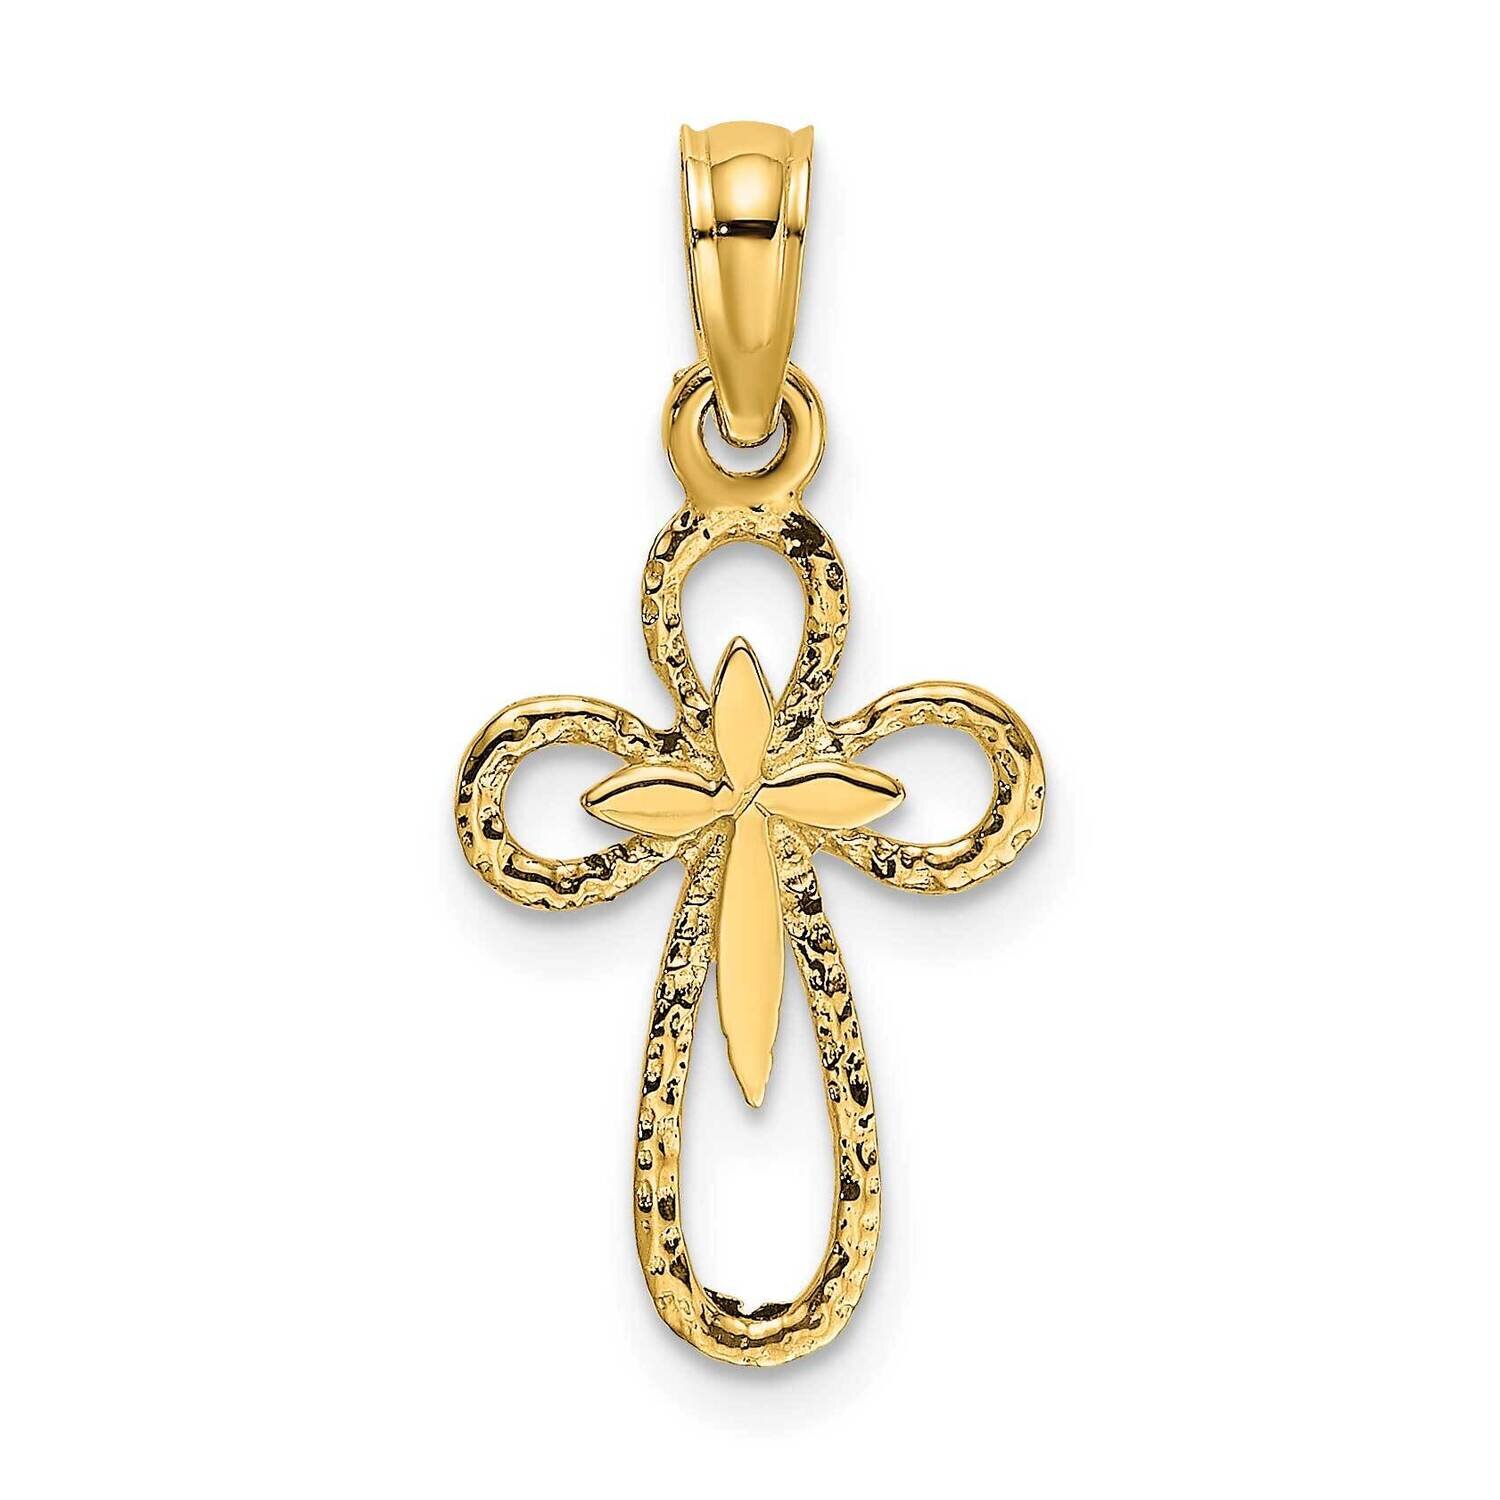 Cross with Small Interior Cross Charm 14k Gold Cut-out K8338